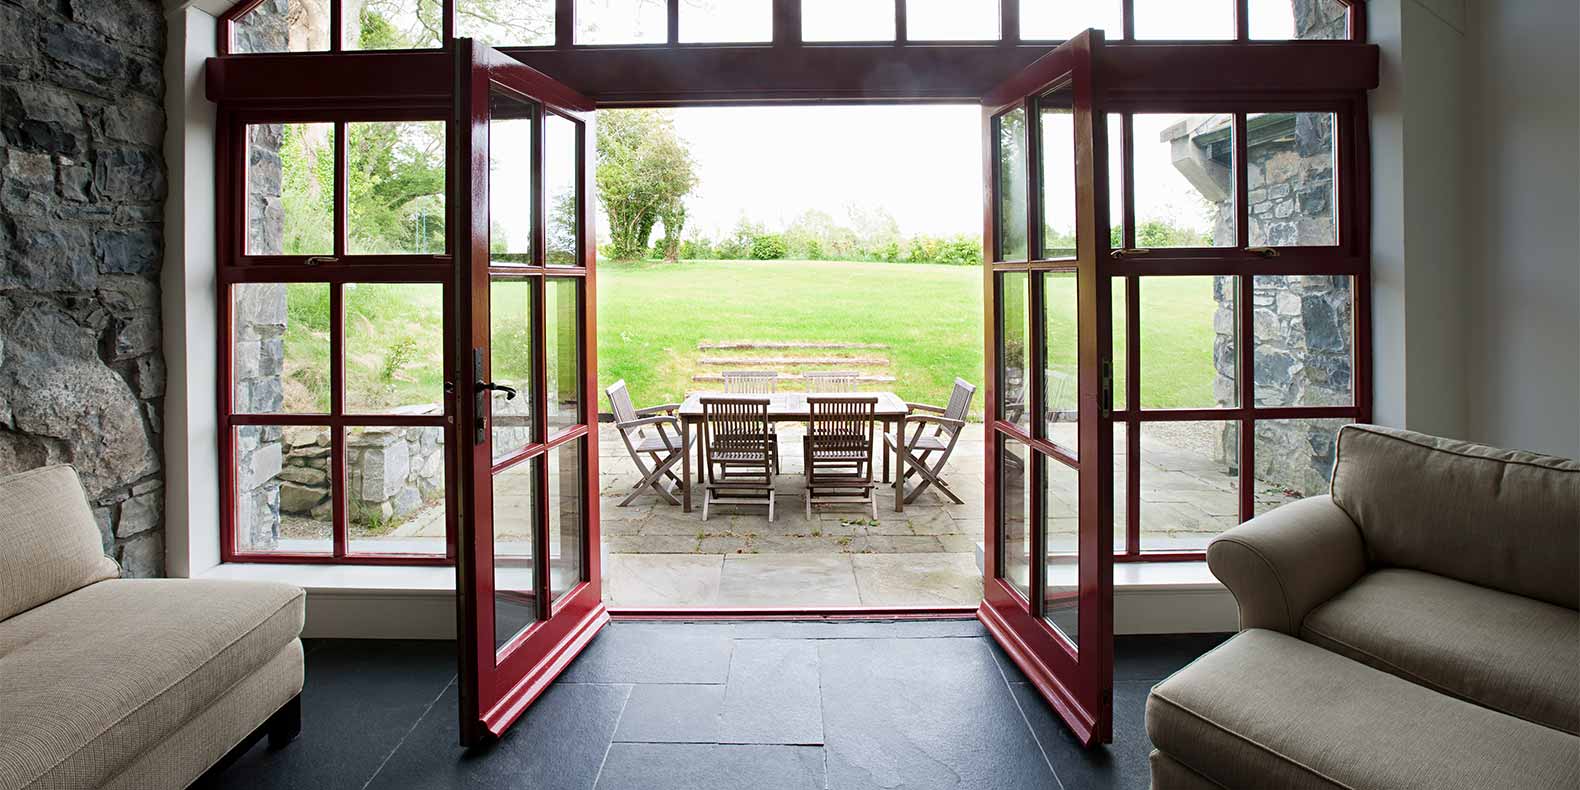 How to Secure French Doors